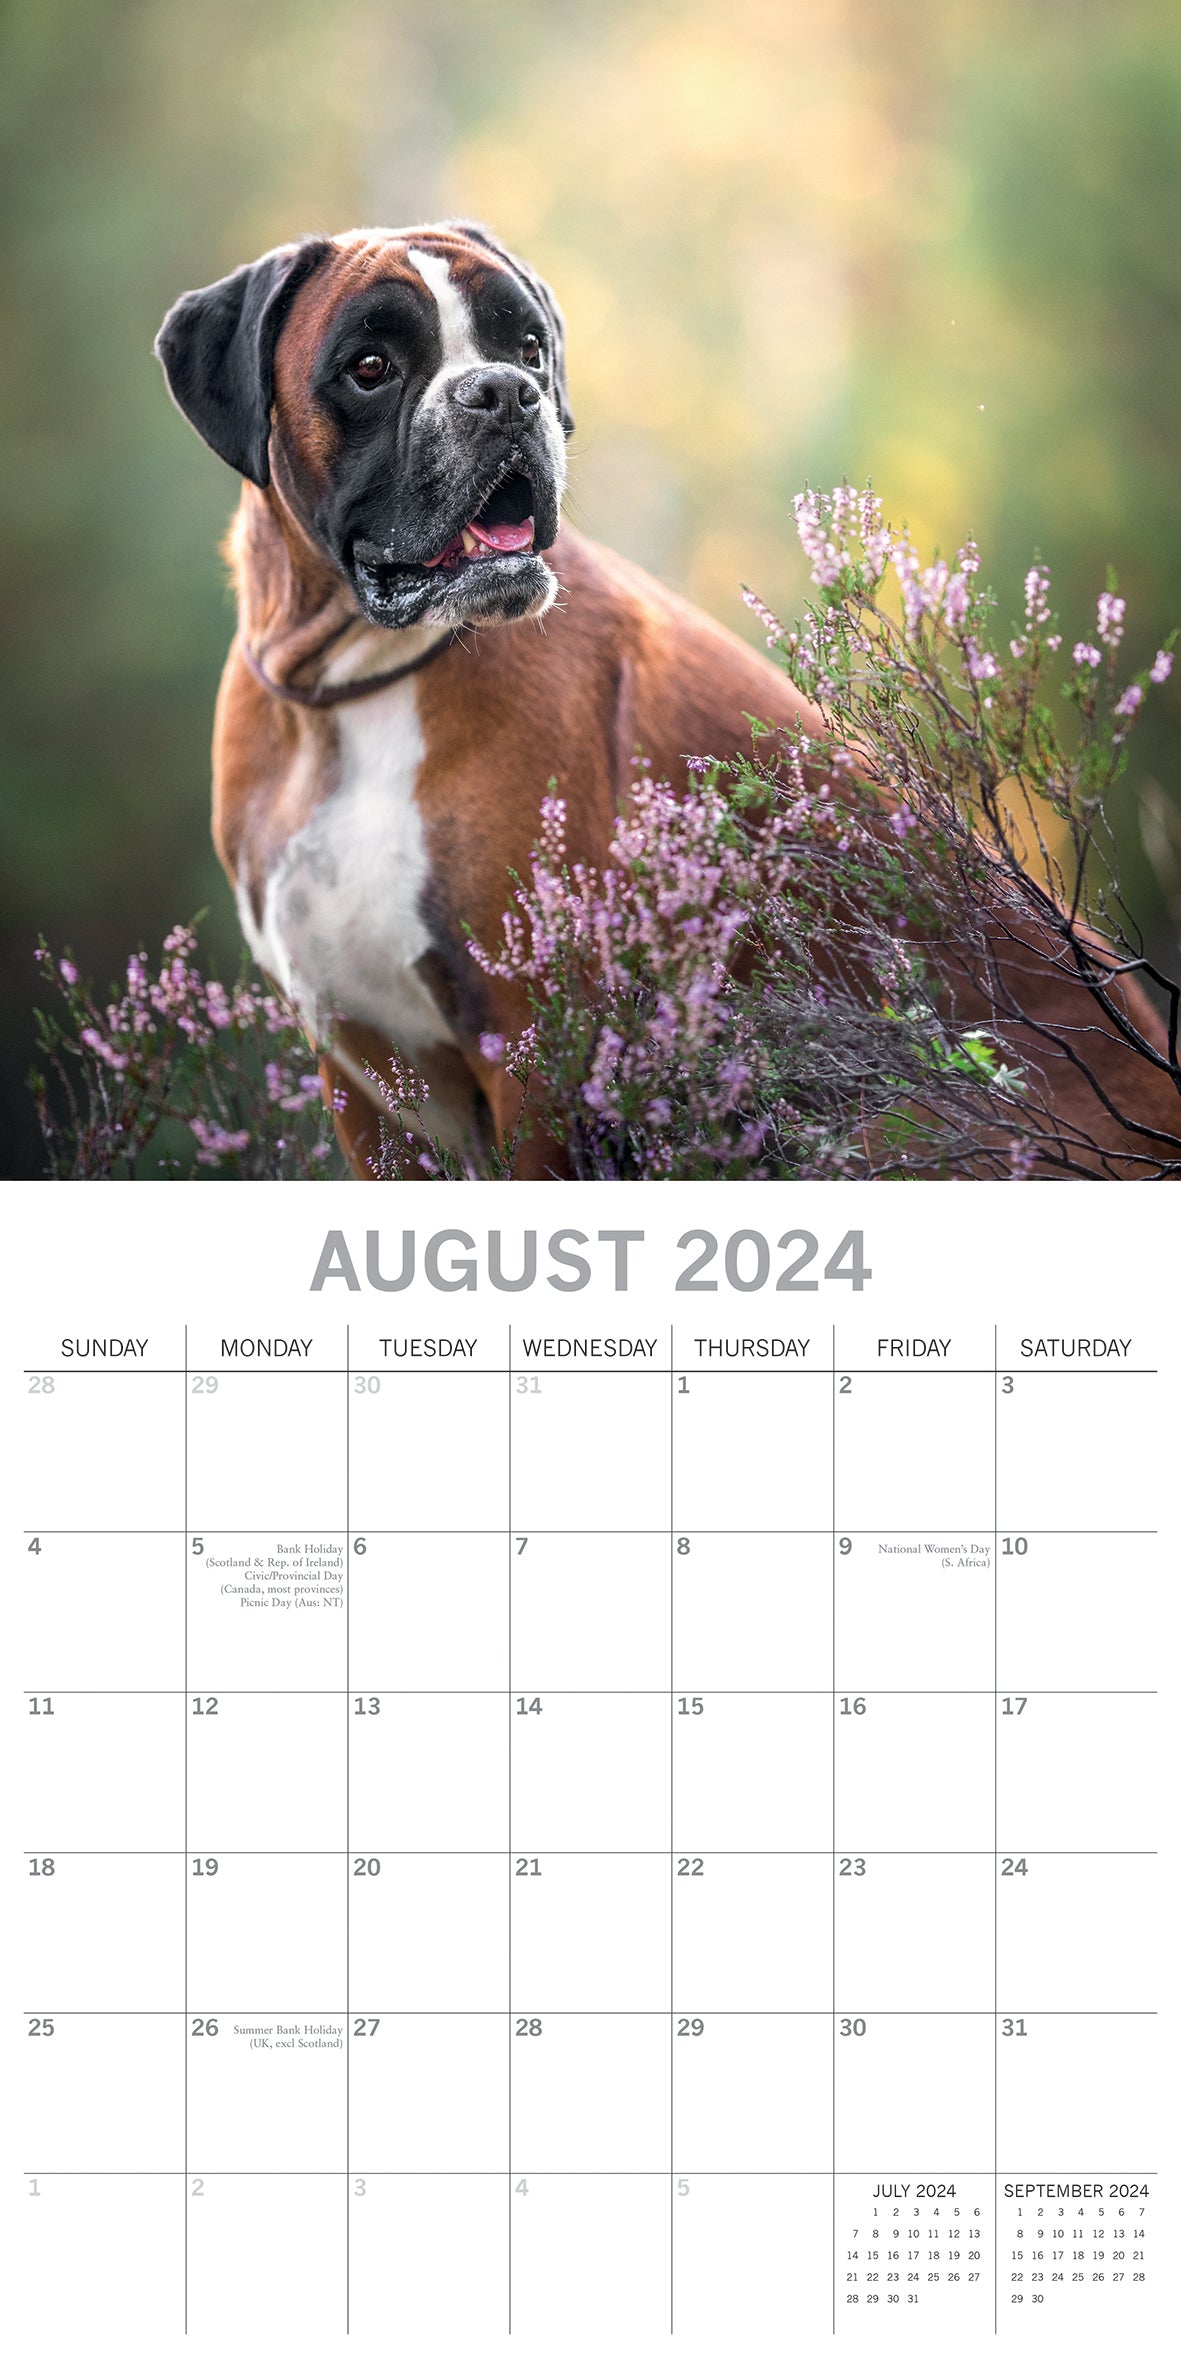 Boxers - 2024 Square Wall Calendar Pets Dog 16 Months Premium Planner New Year